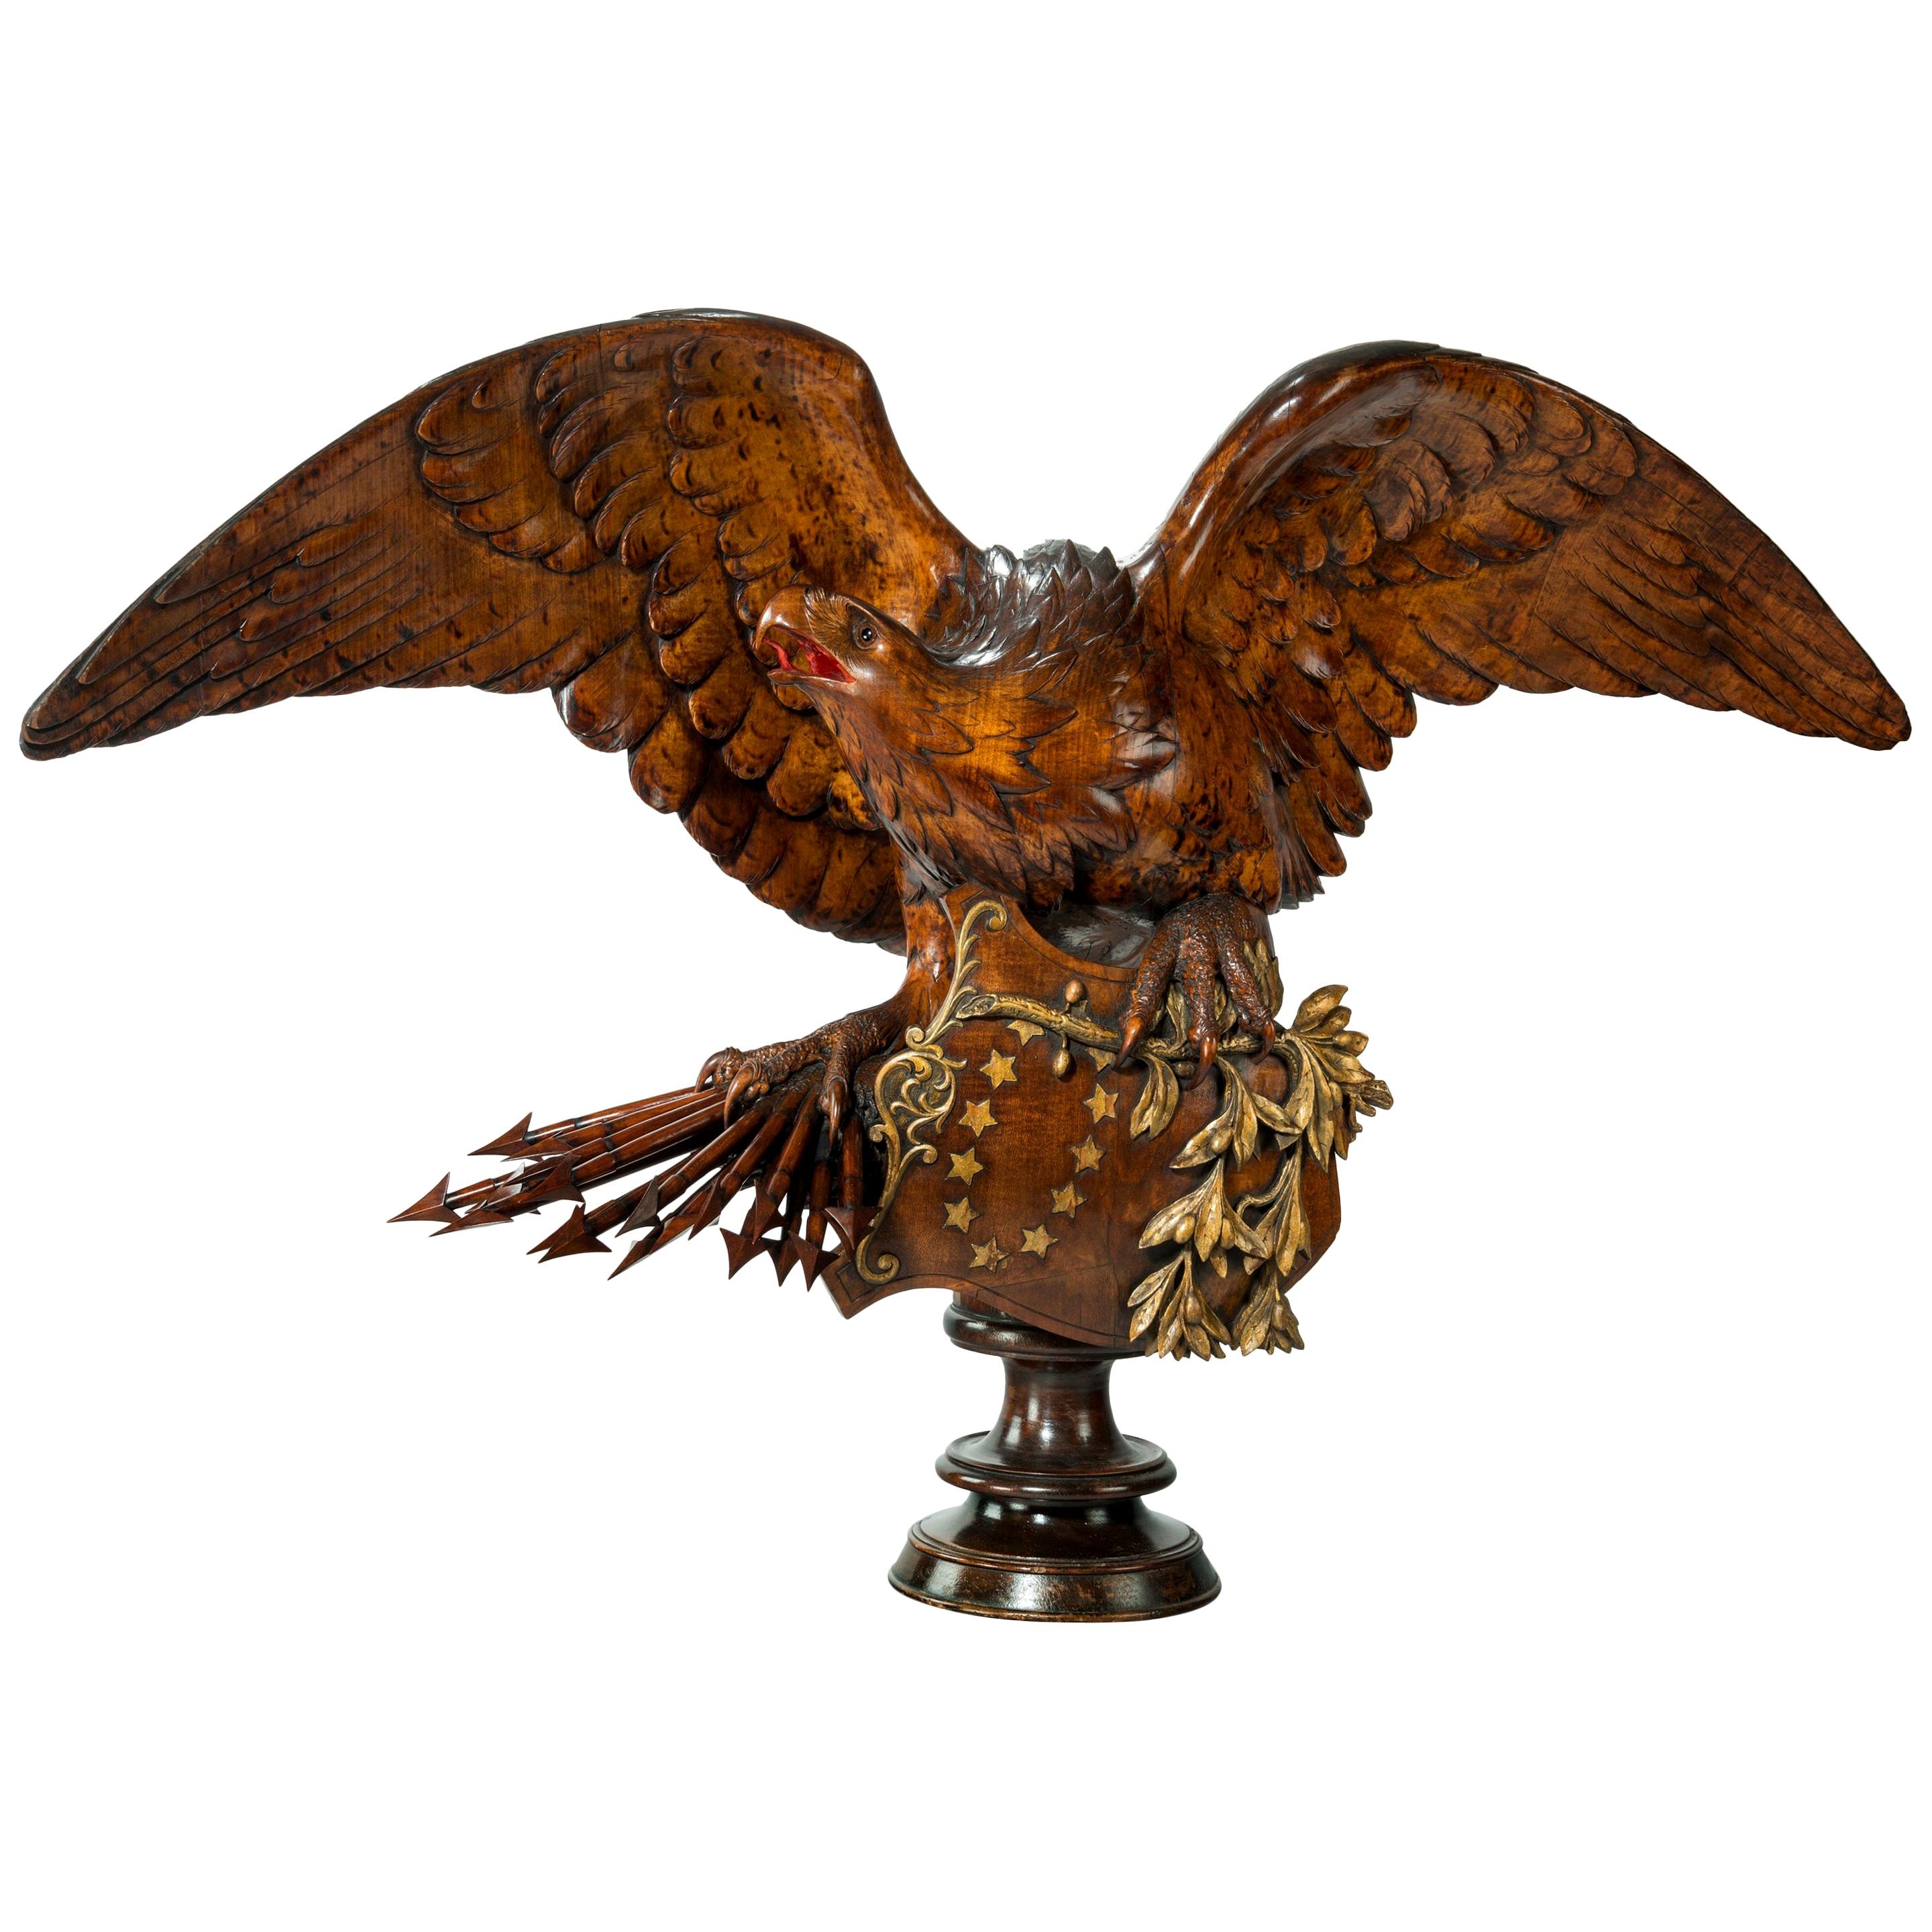 Monumental and Striking ‘Black Forest’ Walnut Carving of an Eagle